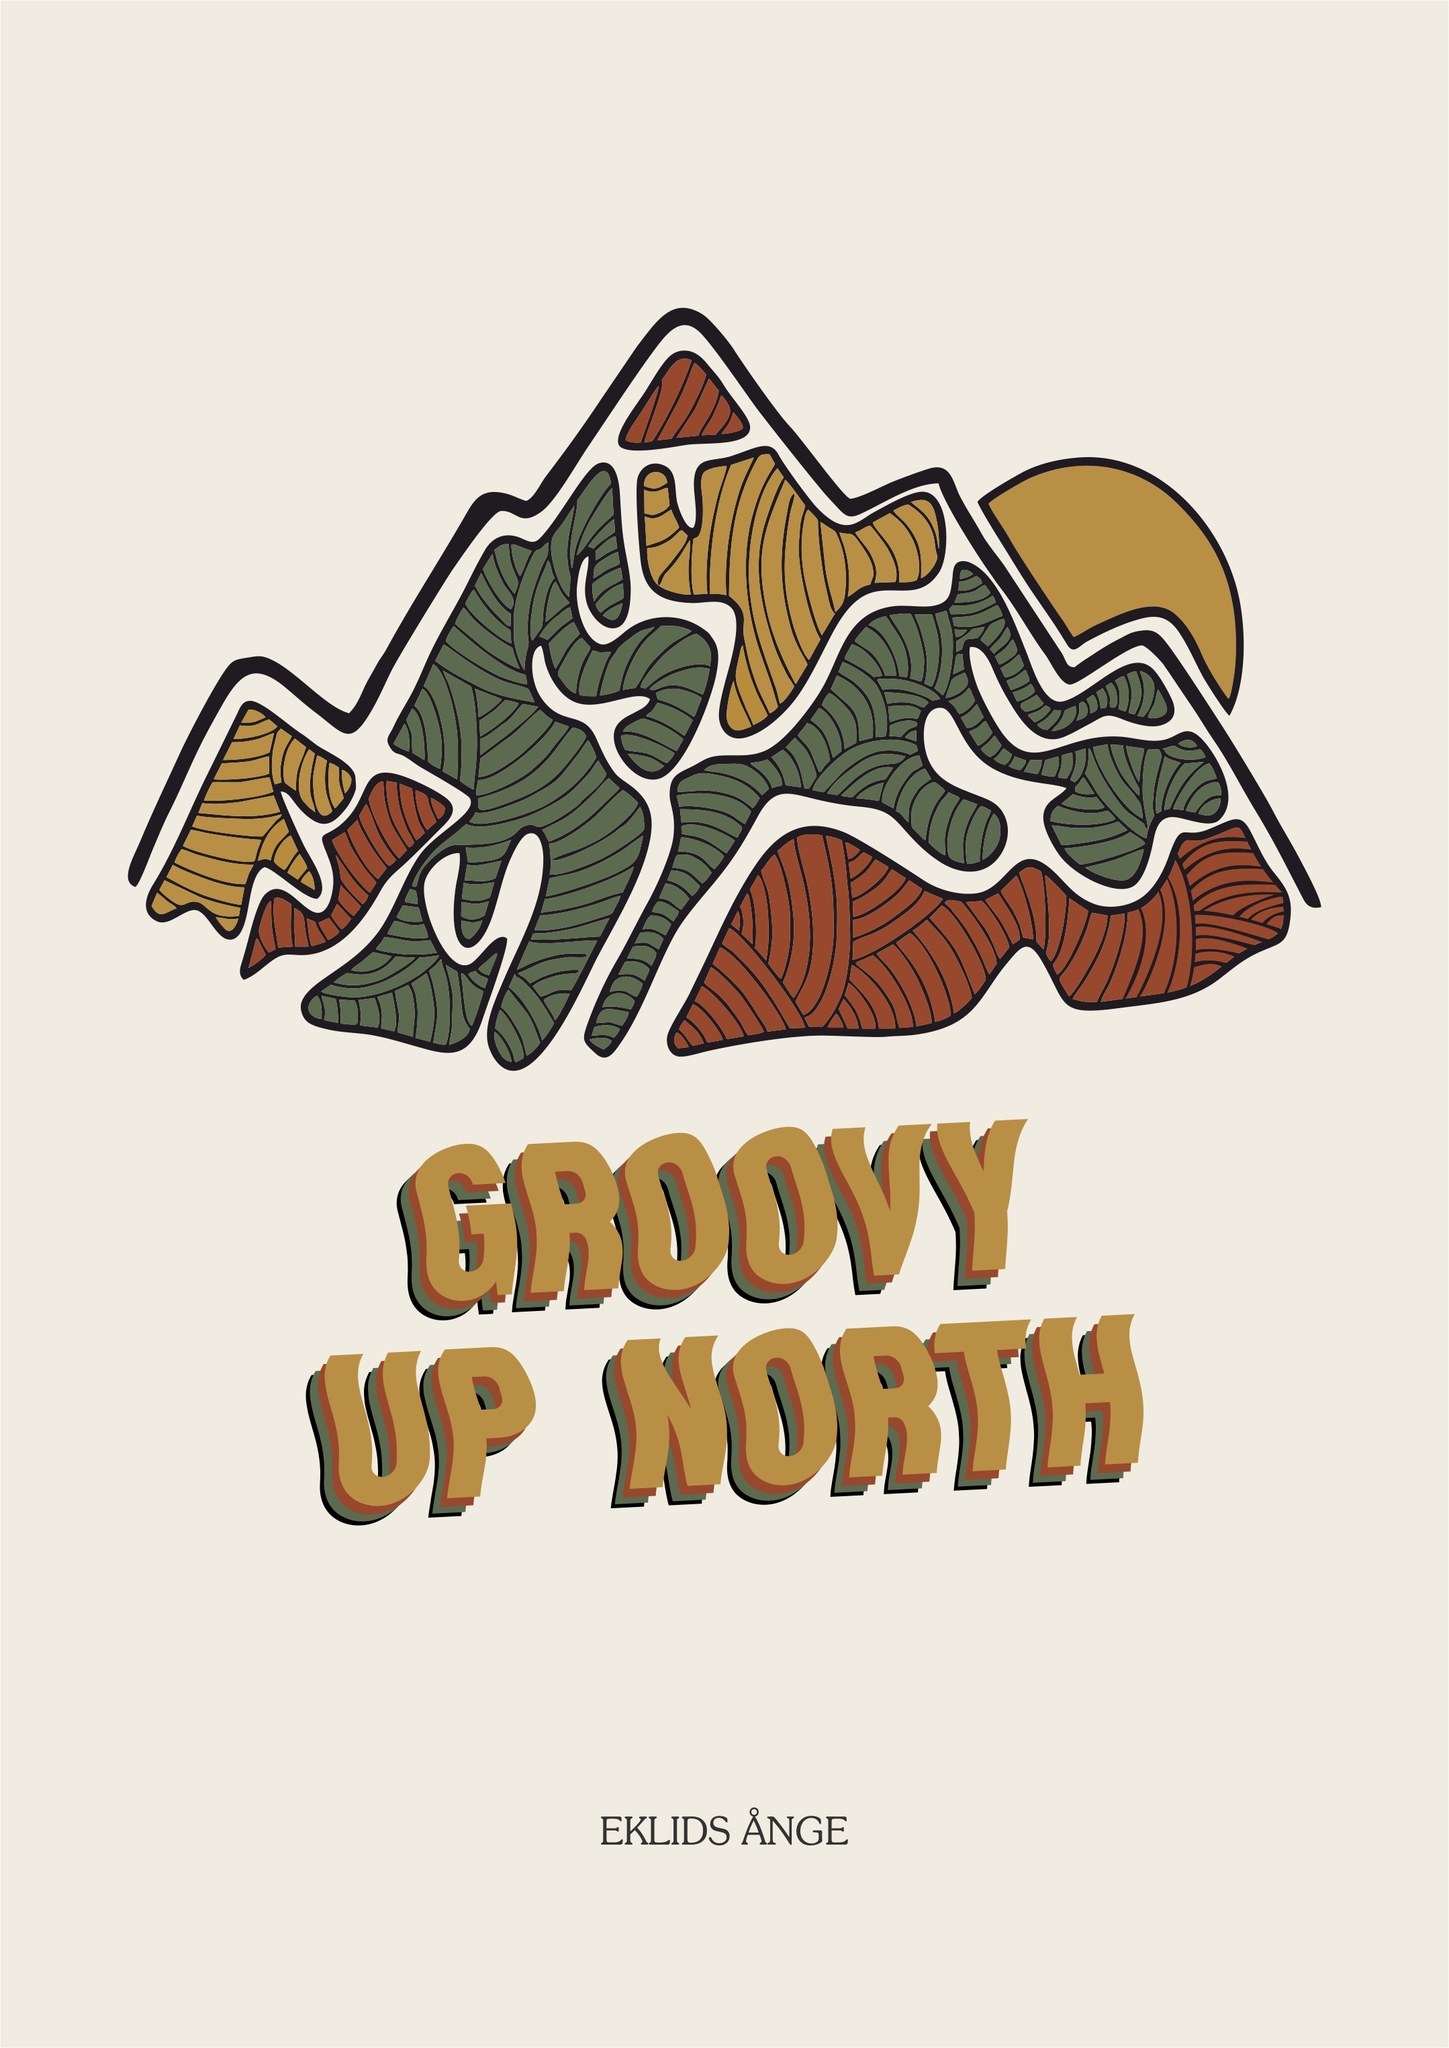 EKLIDS poster: "Groovy Up North"